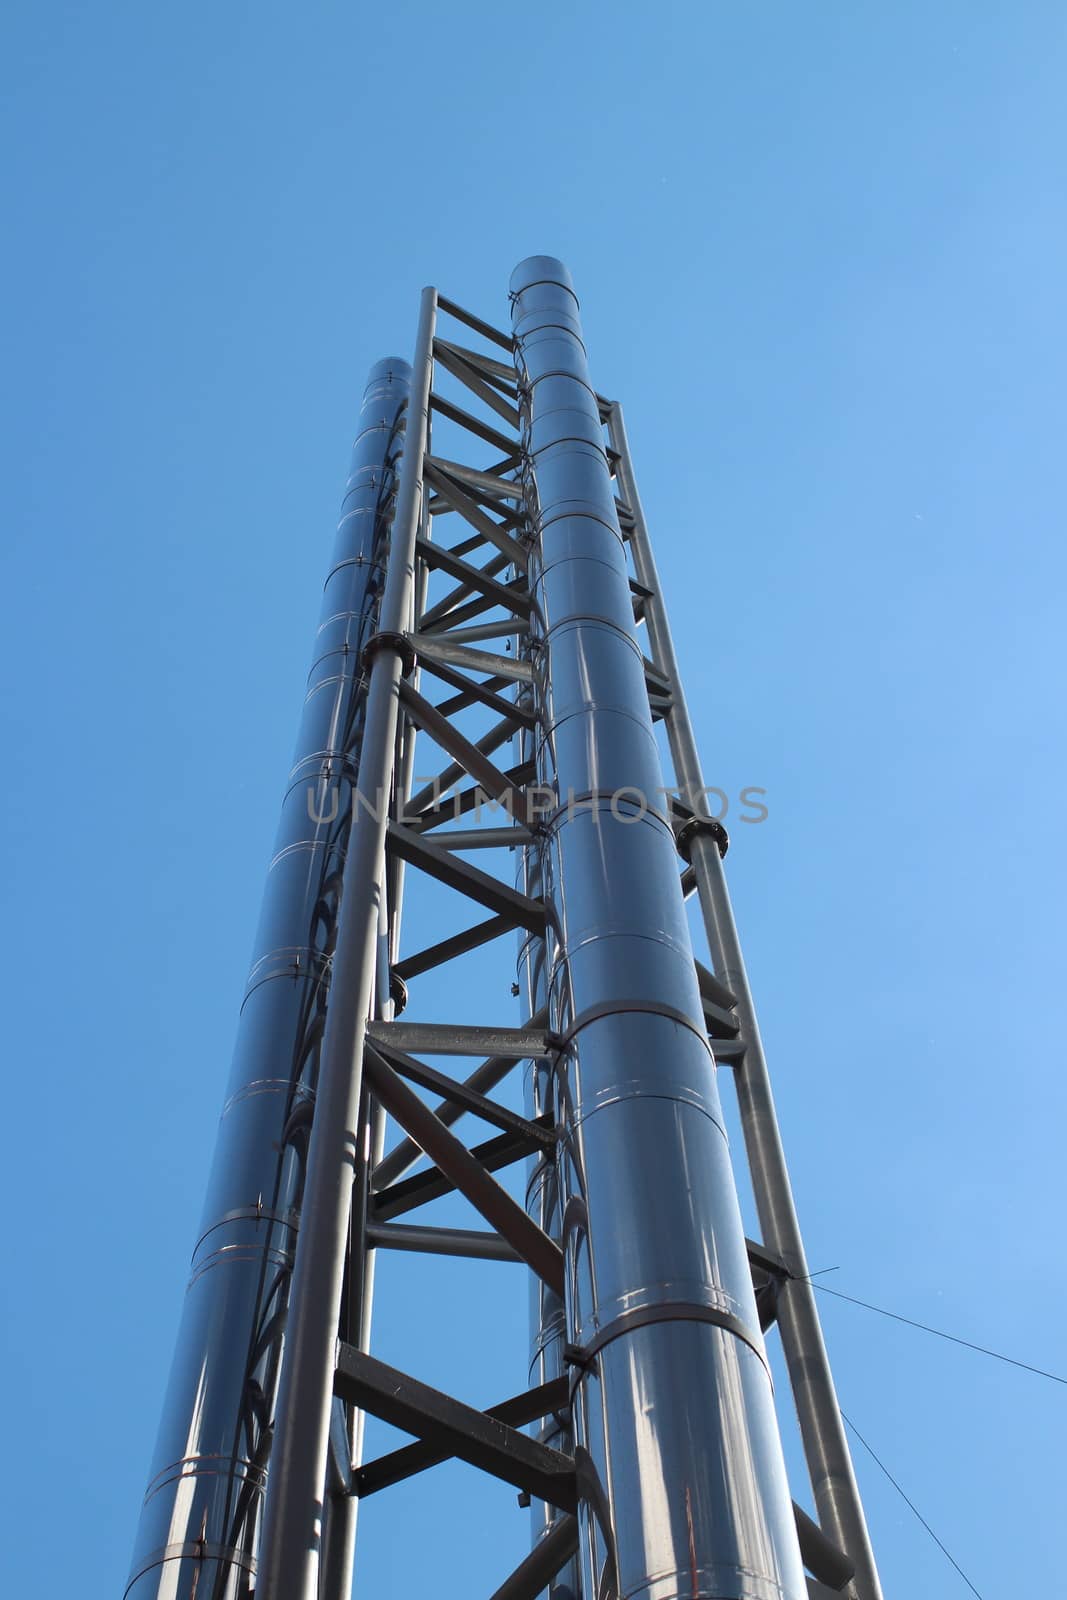 smokestack with stainless steel against a background of blue sky